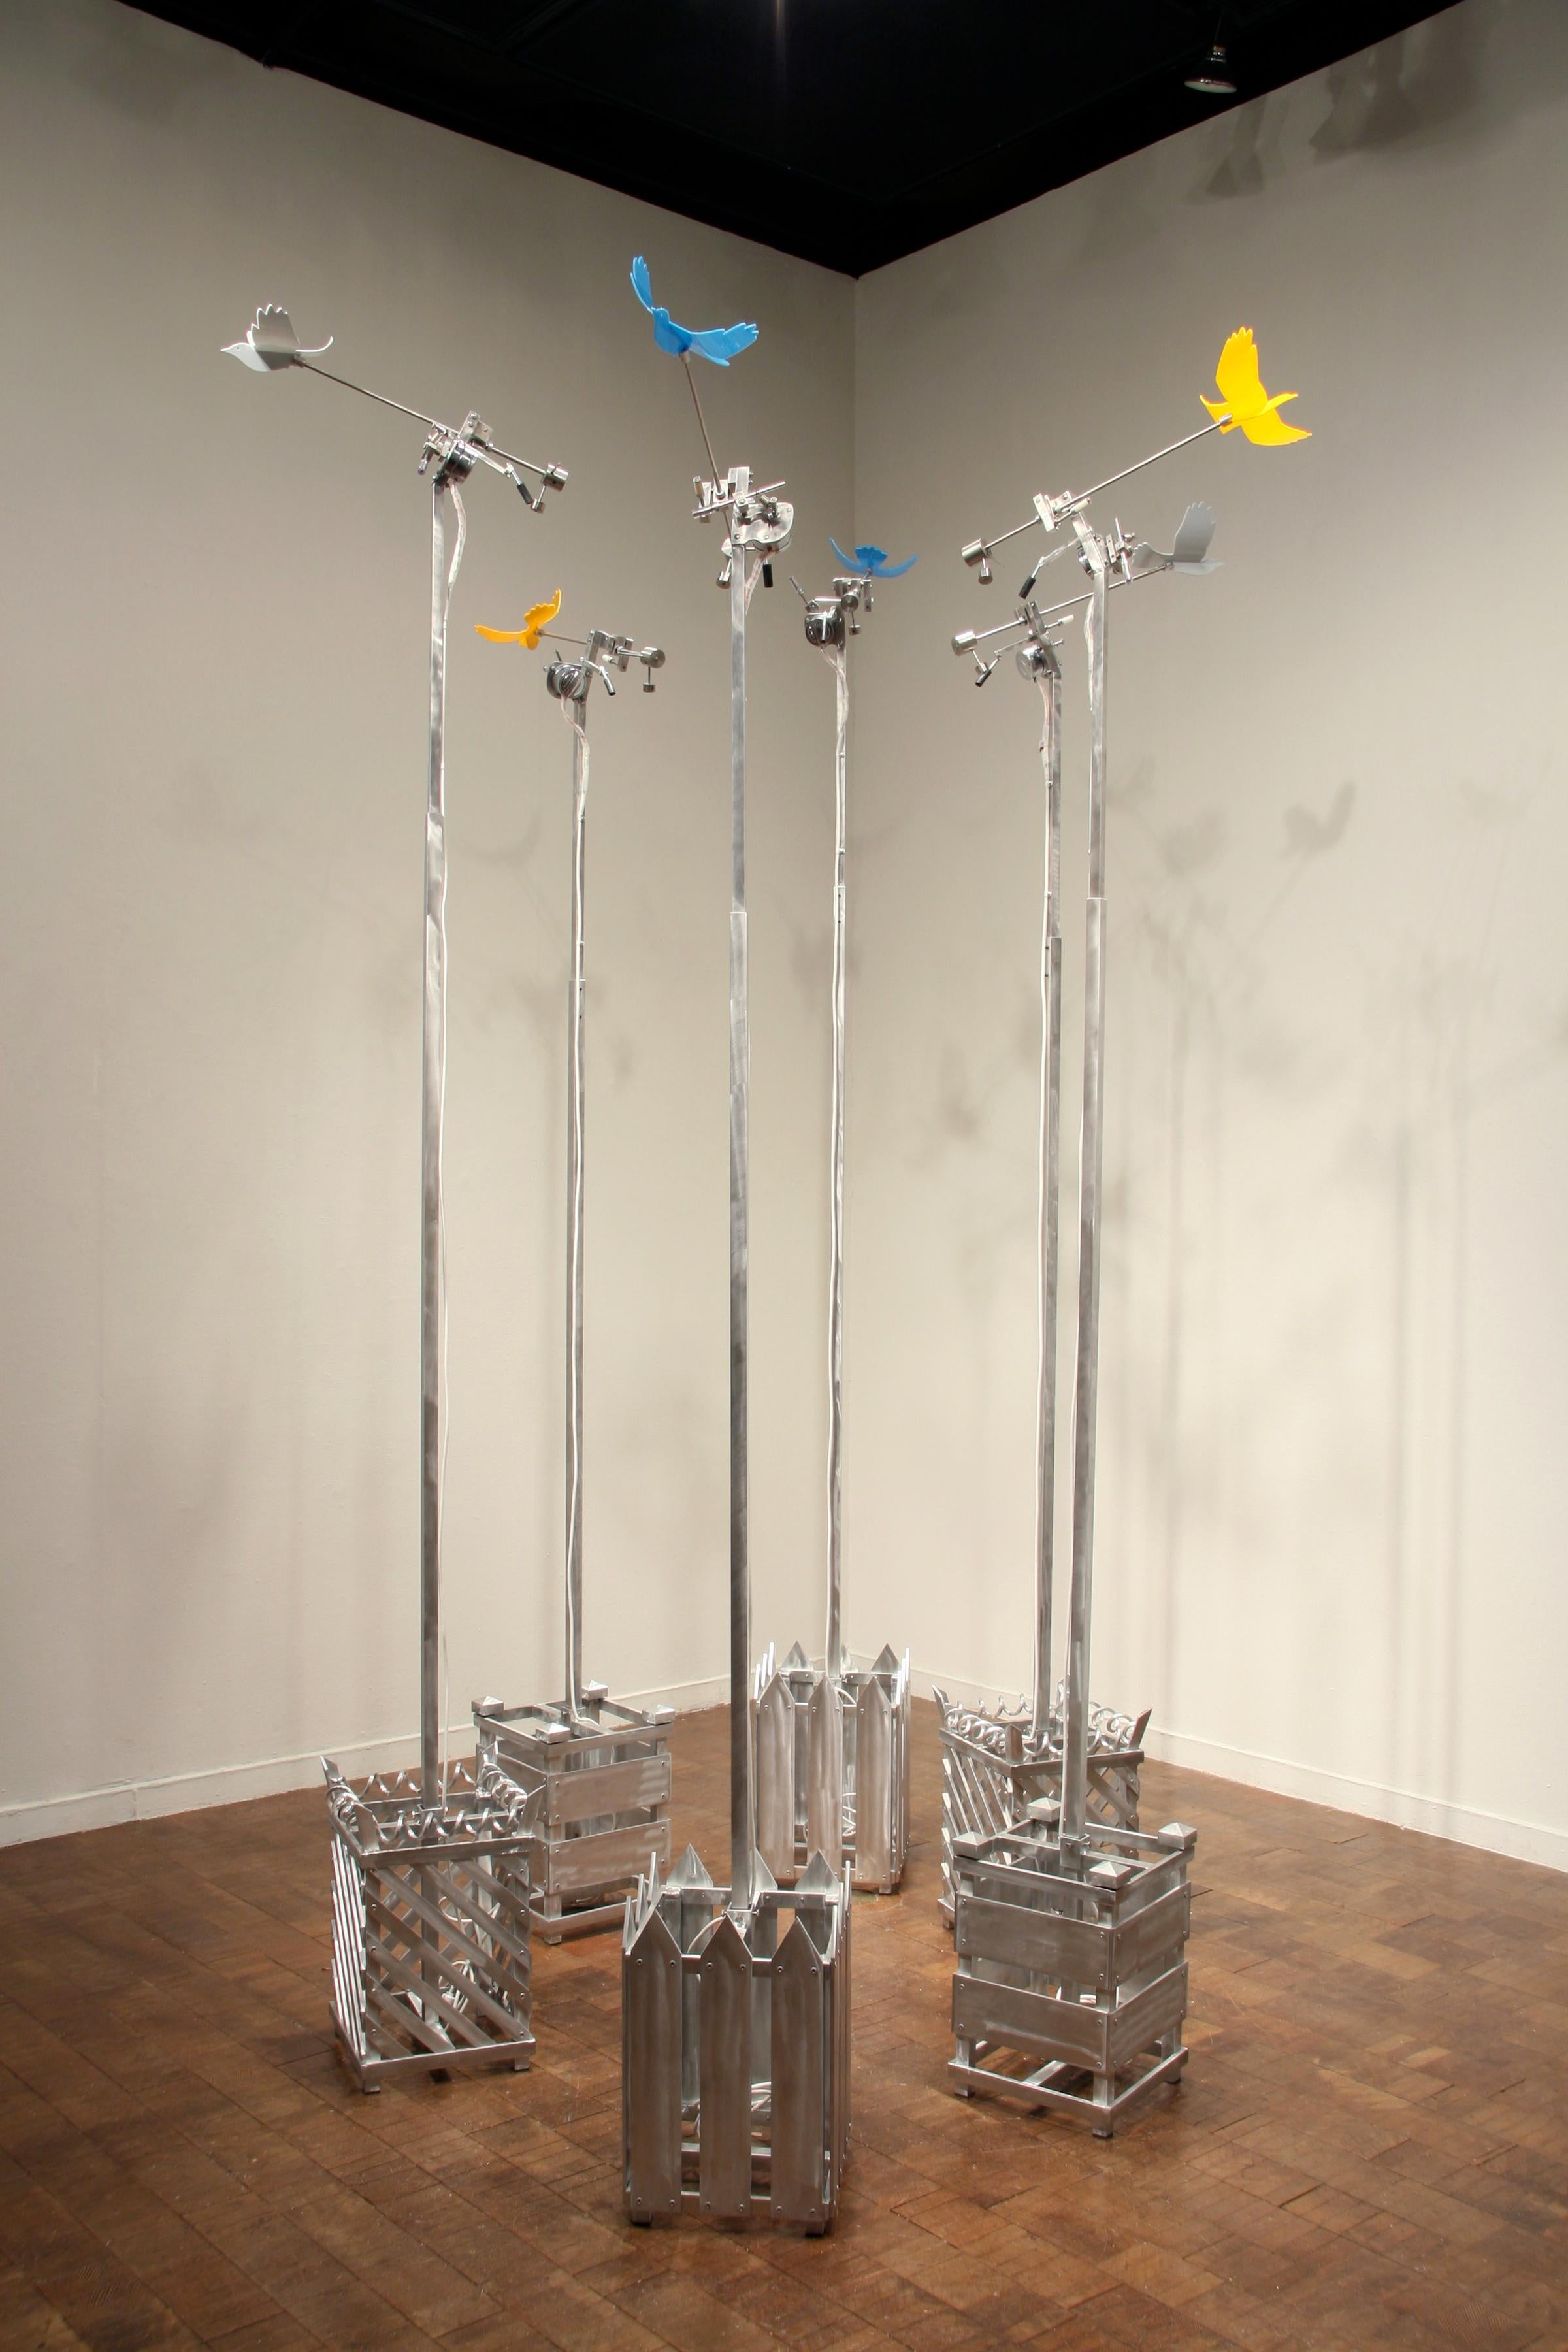 Jim Jenkins’ “Territories” is a contemporary,  kinetic electronic, motor-operated sculpture made with  aluminum, Yellow plexiglass and brass. Each individual piece measures 105 - 130